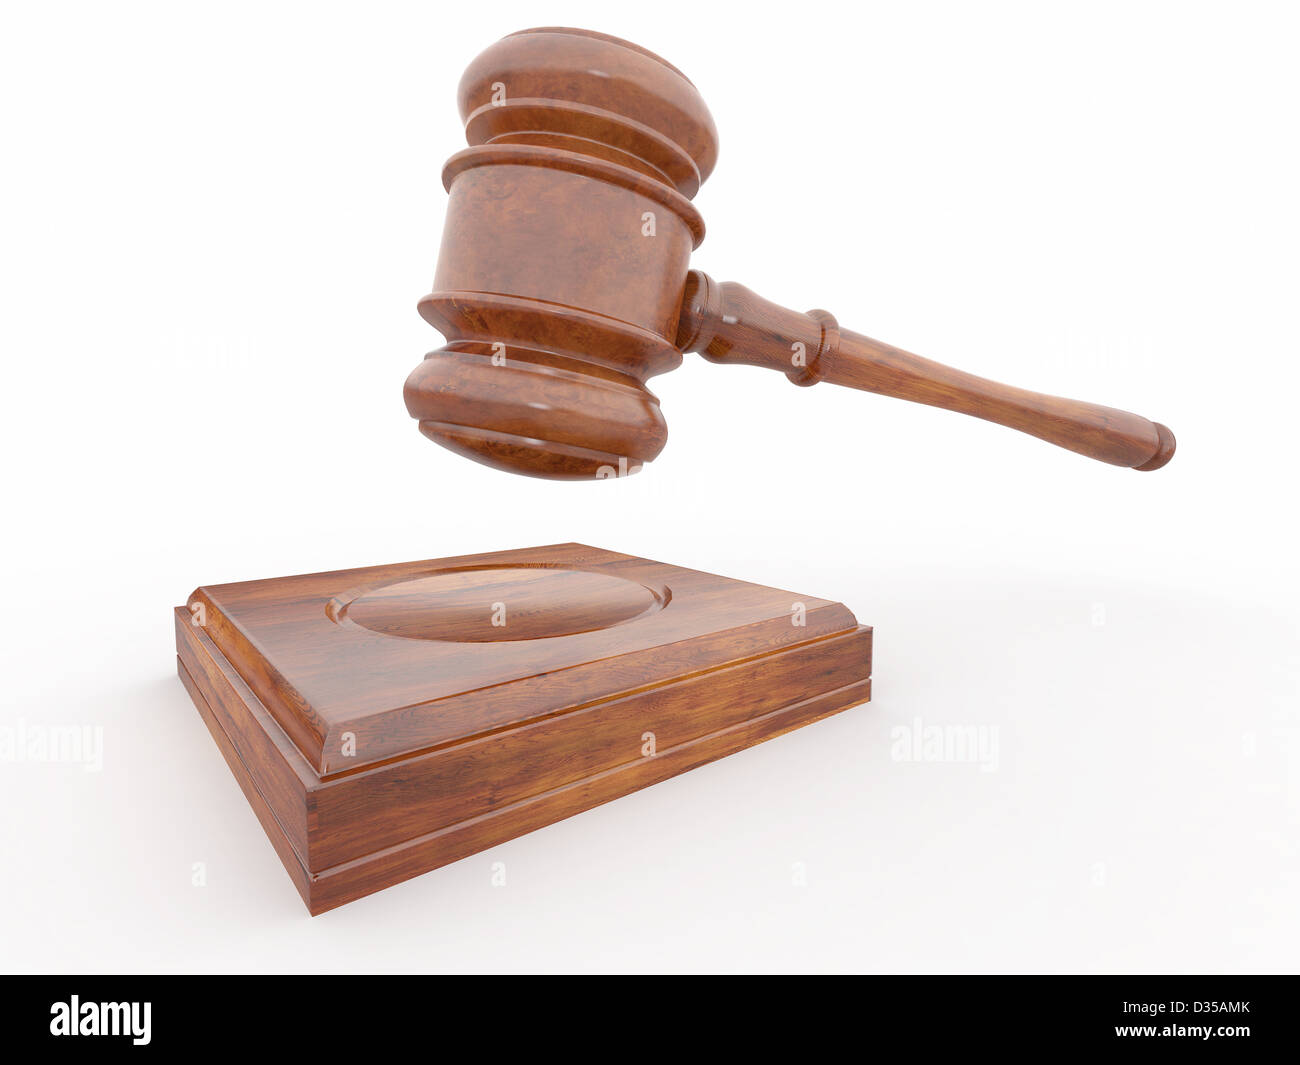 Isolaed juge gavel on white background. 3d Banque D'Images